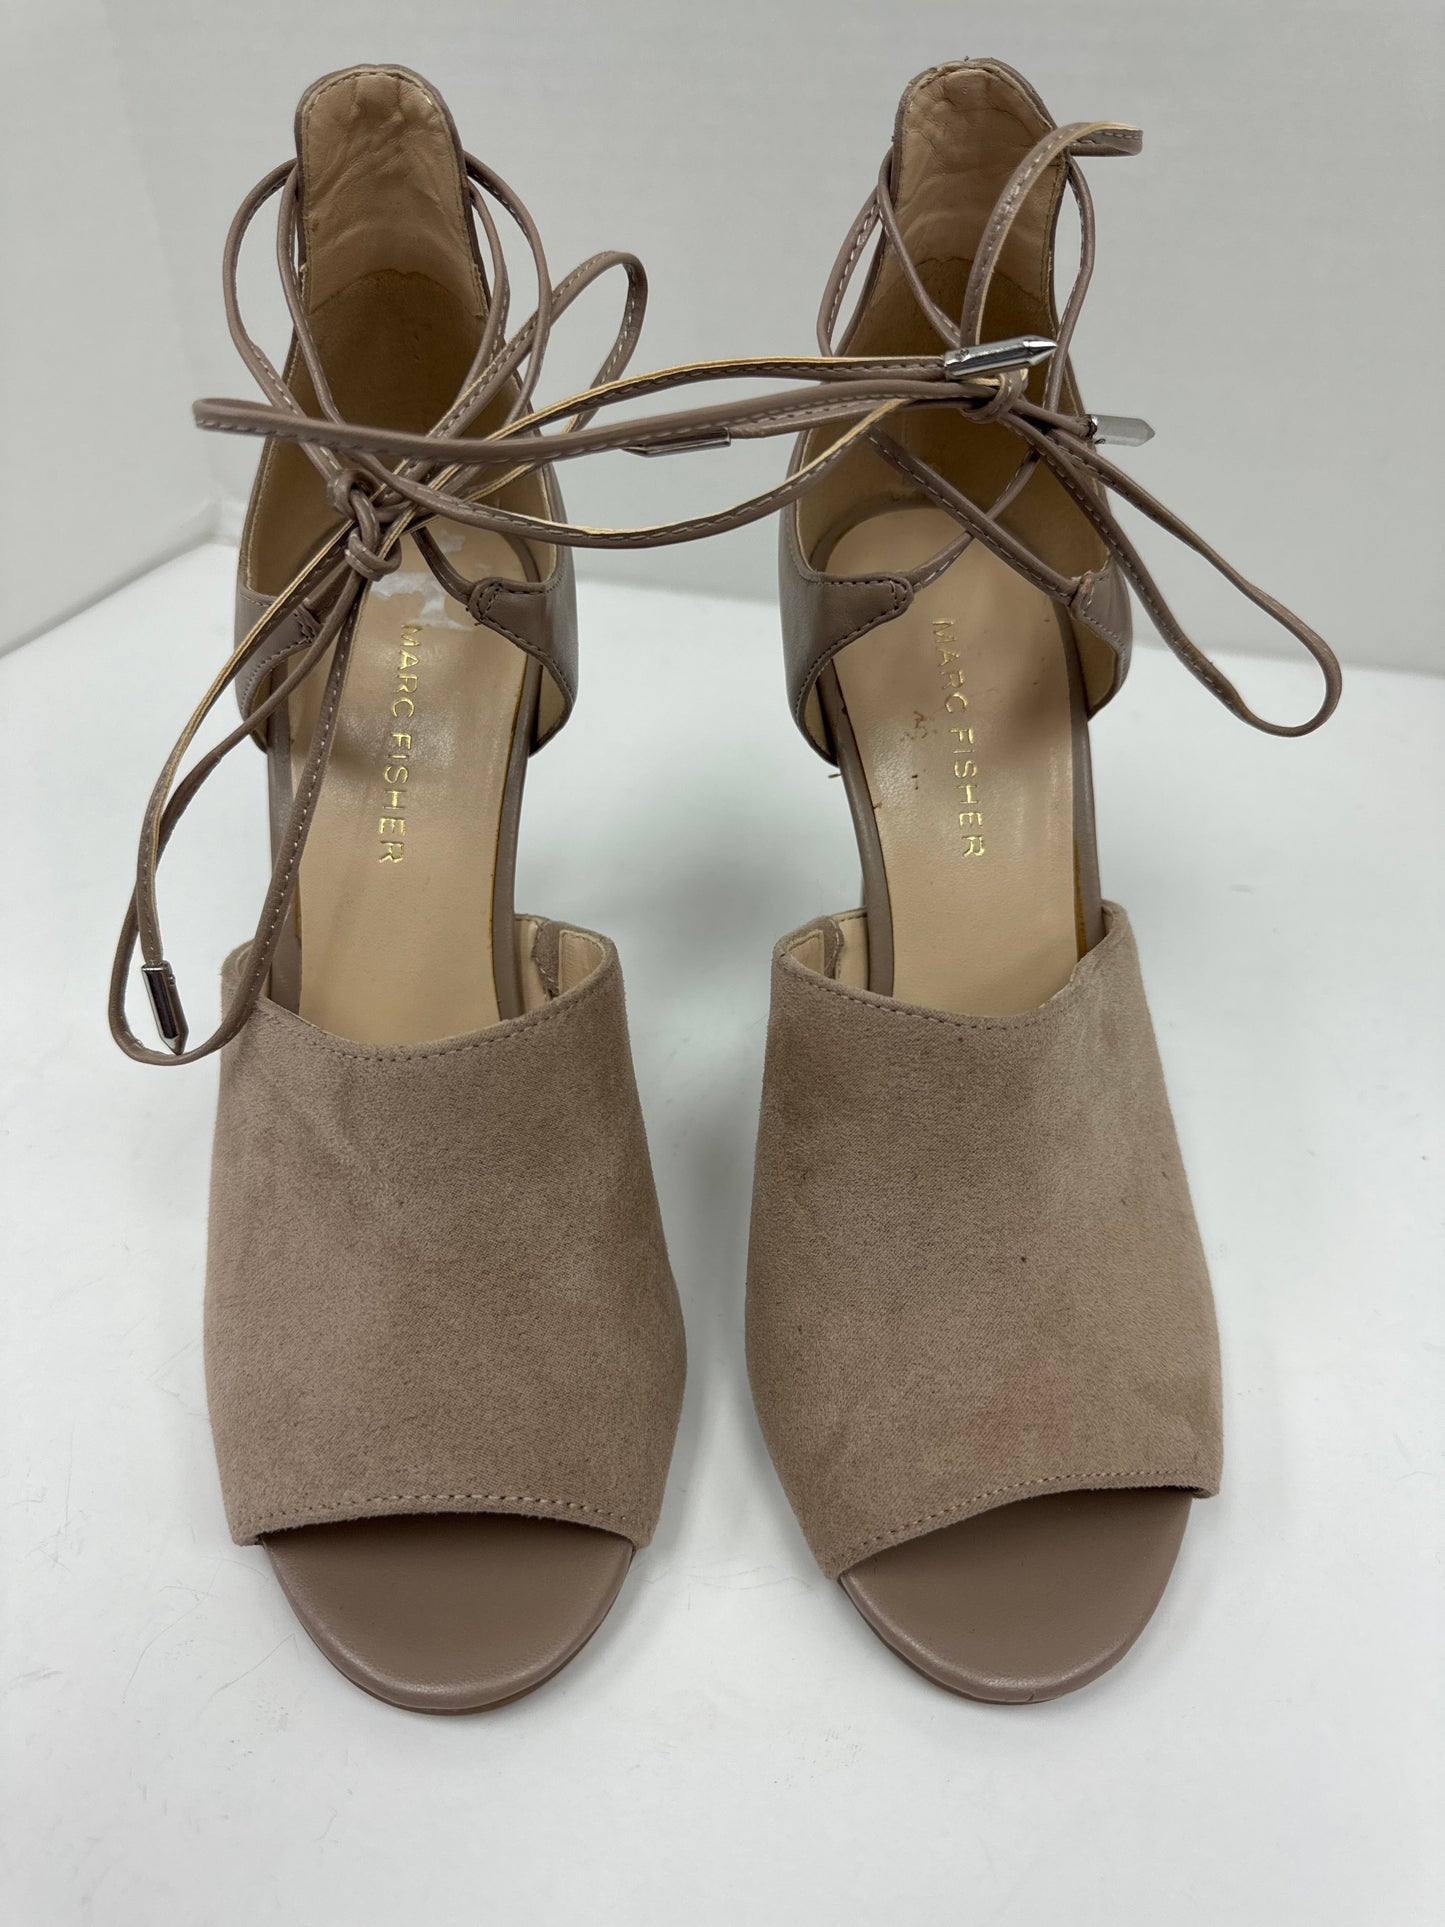 Taupe Shoes Heels Stiletto Marc Fisher, Size 7.5